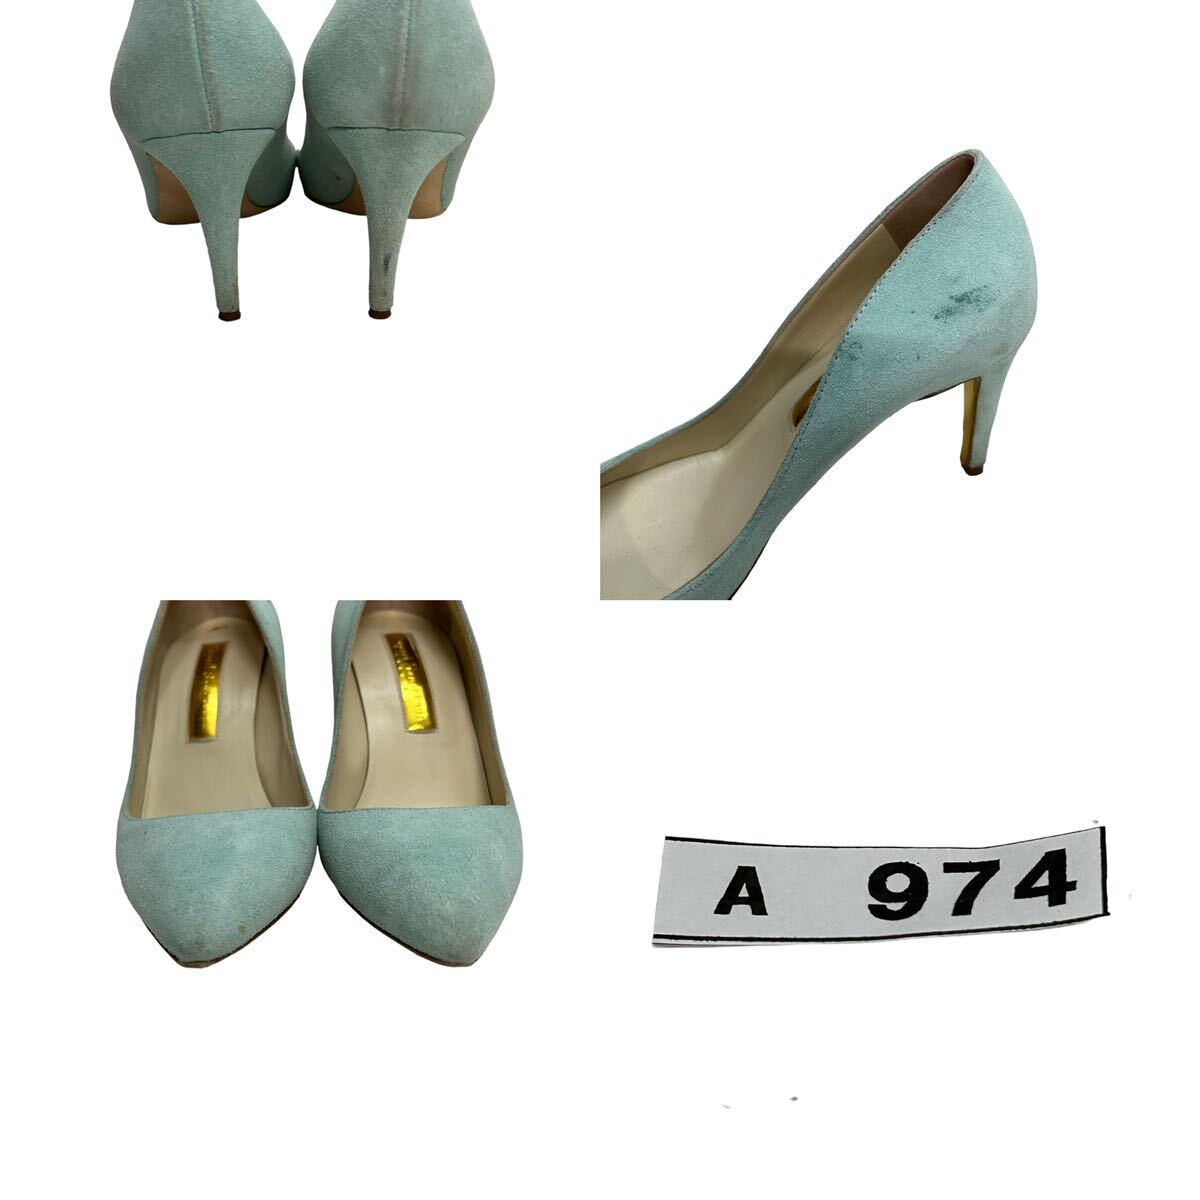 A974 Italy made Rupert Sanderson Rupert Thunder son lady's po Inte dotu pumps 37 approximately 23.5cm light blue suede 